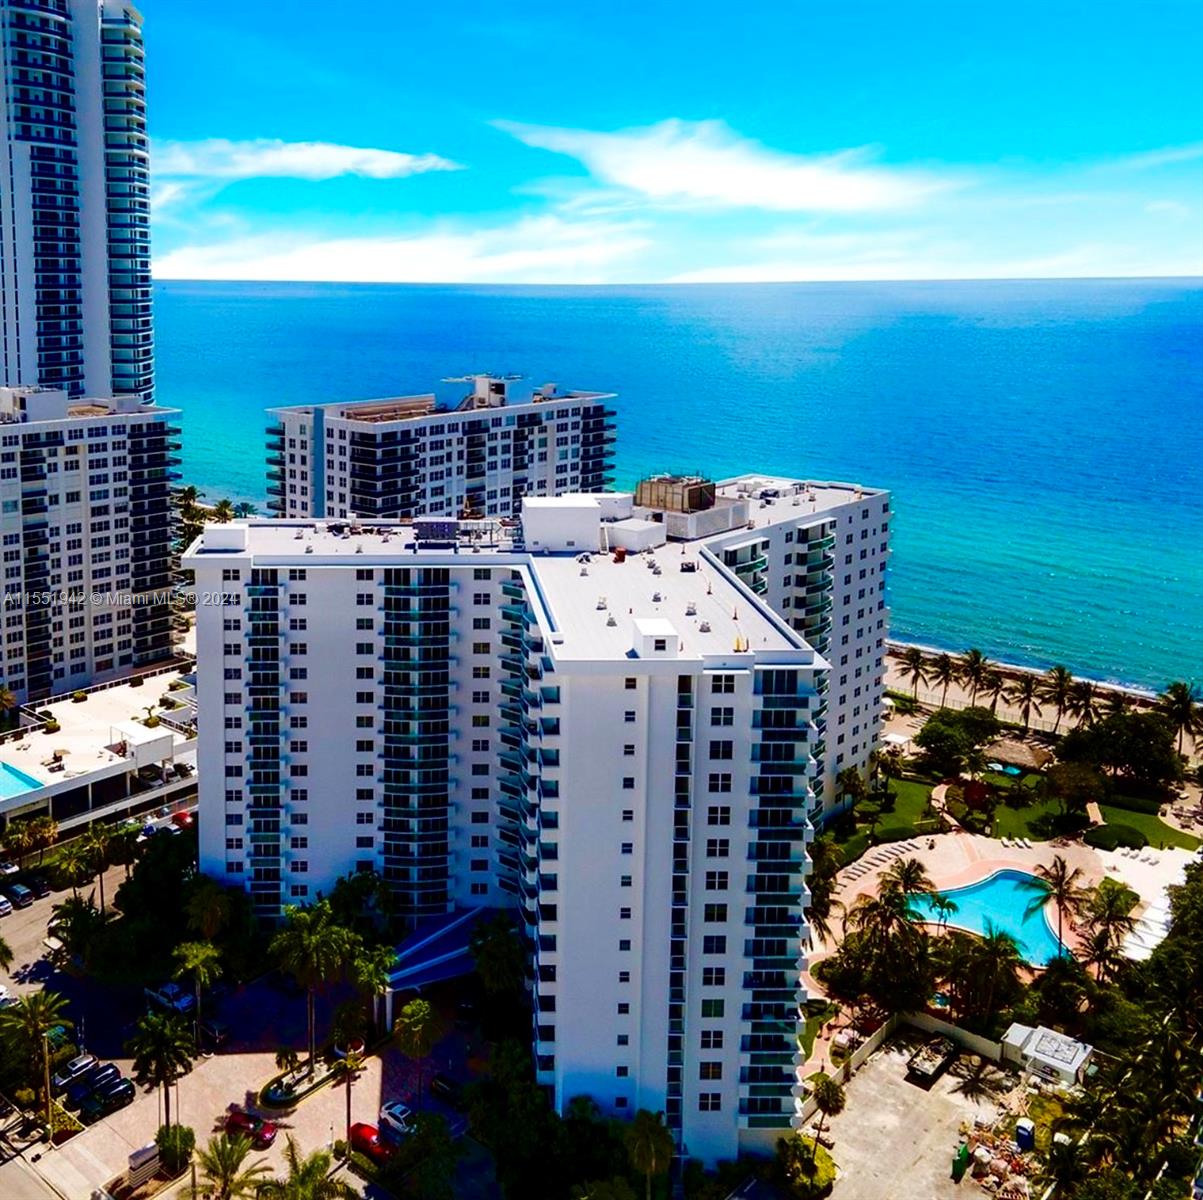 3001 S Ocean Dr 1041, Hollywood, Florida 33019, 2 Bedrooms Bedrooms, ,2 BathroomsBathrooms,Residentiallease,For Rent,3001 S Ocean Dr 1041,A11551942